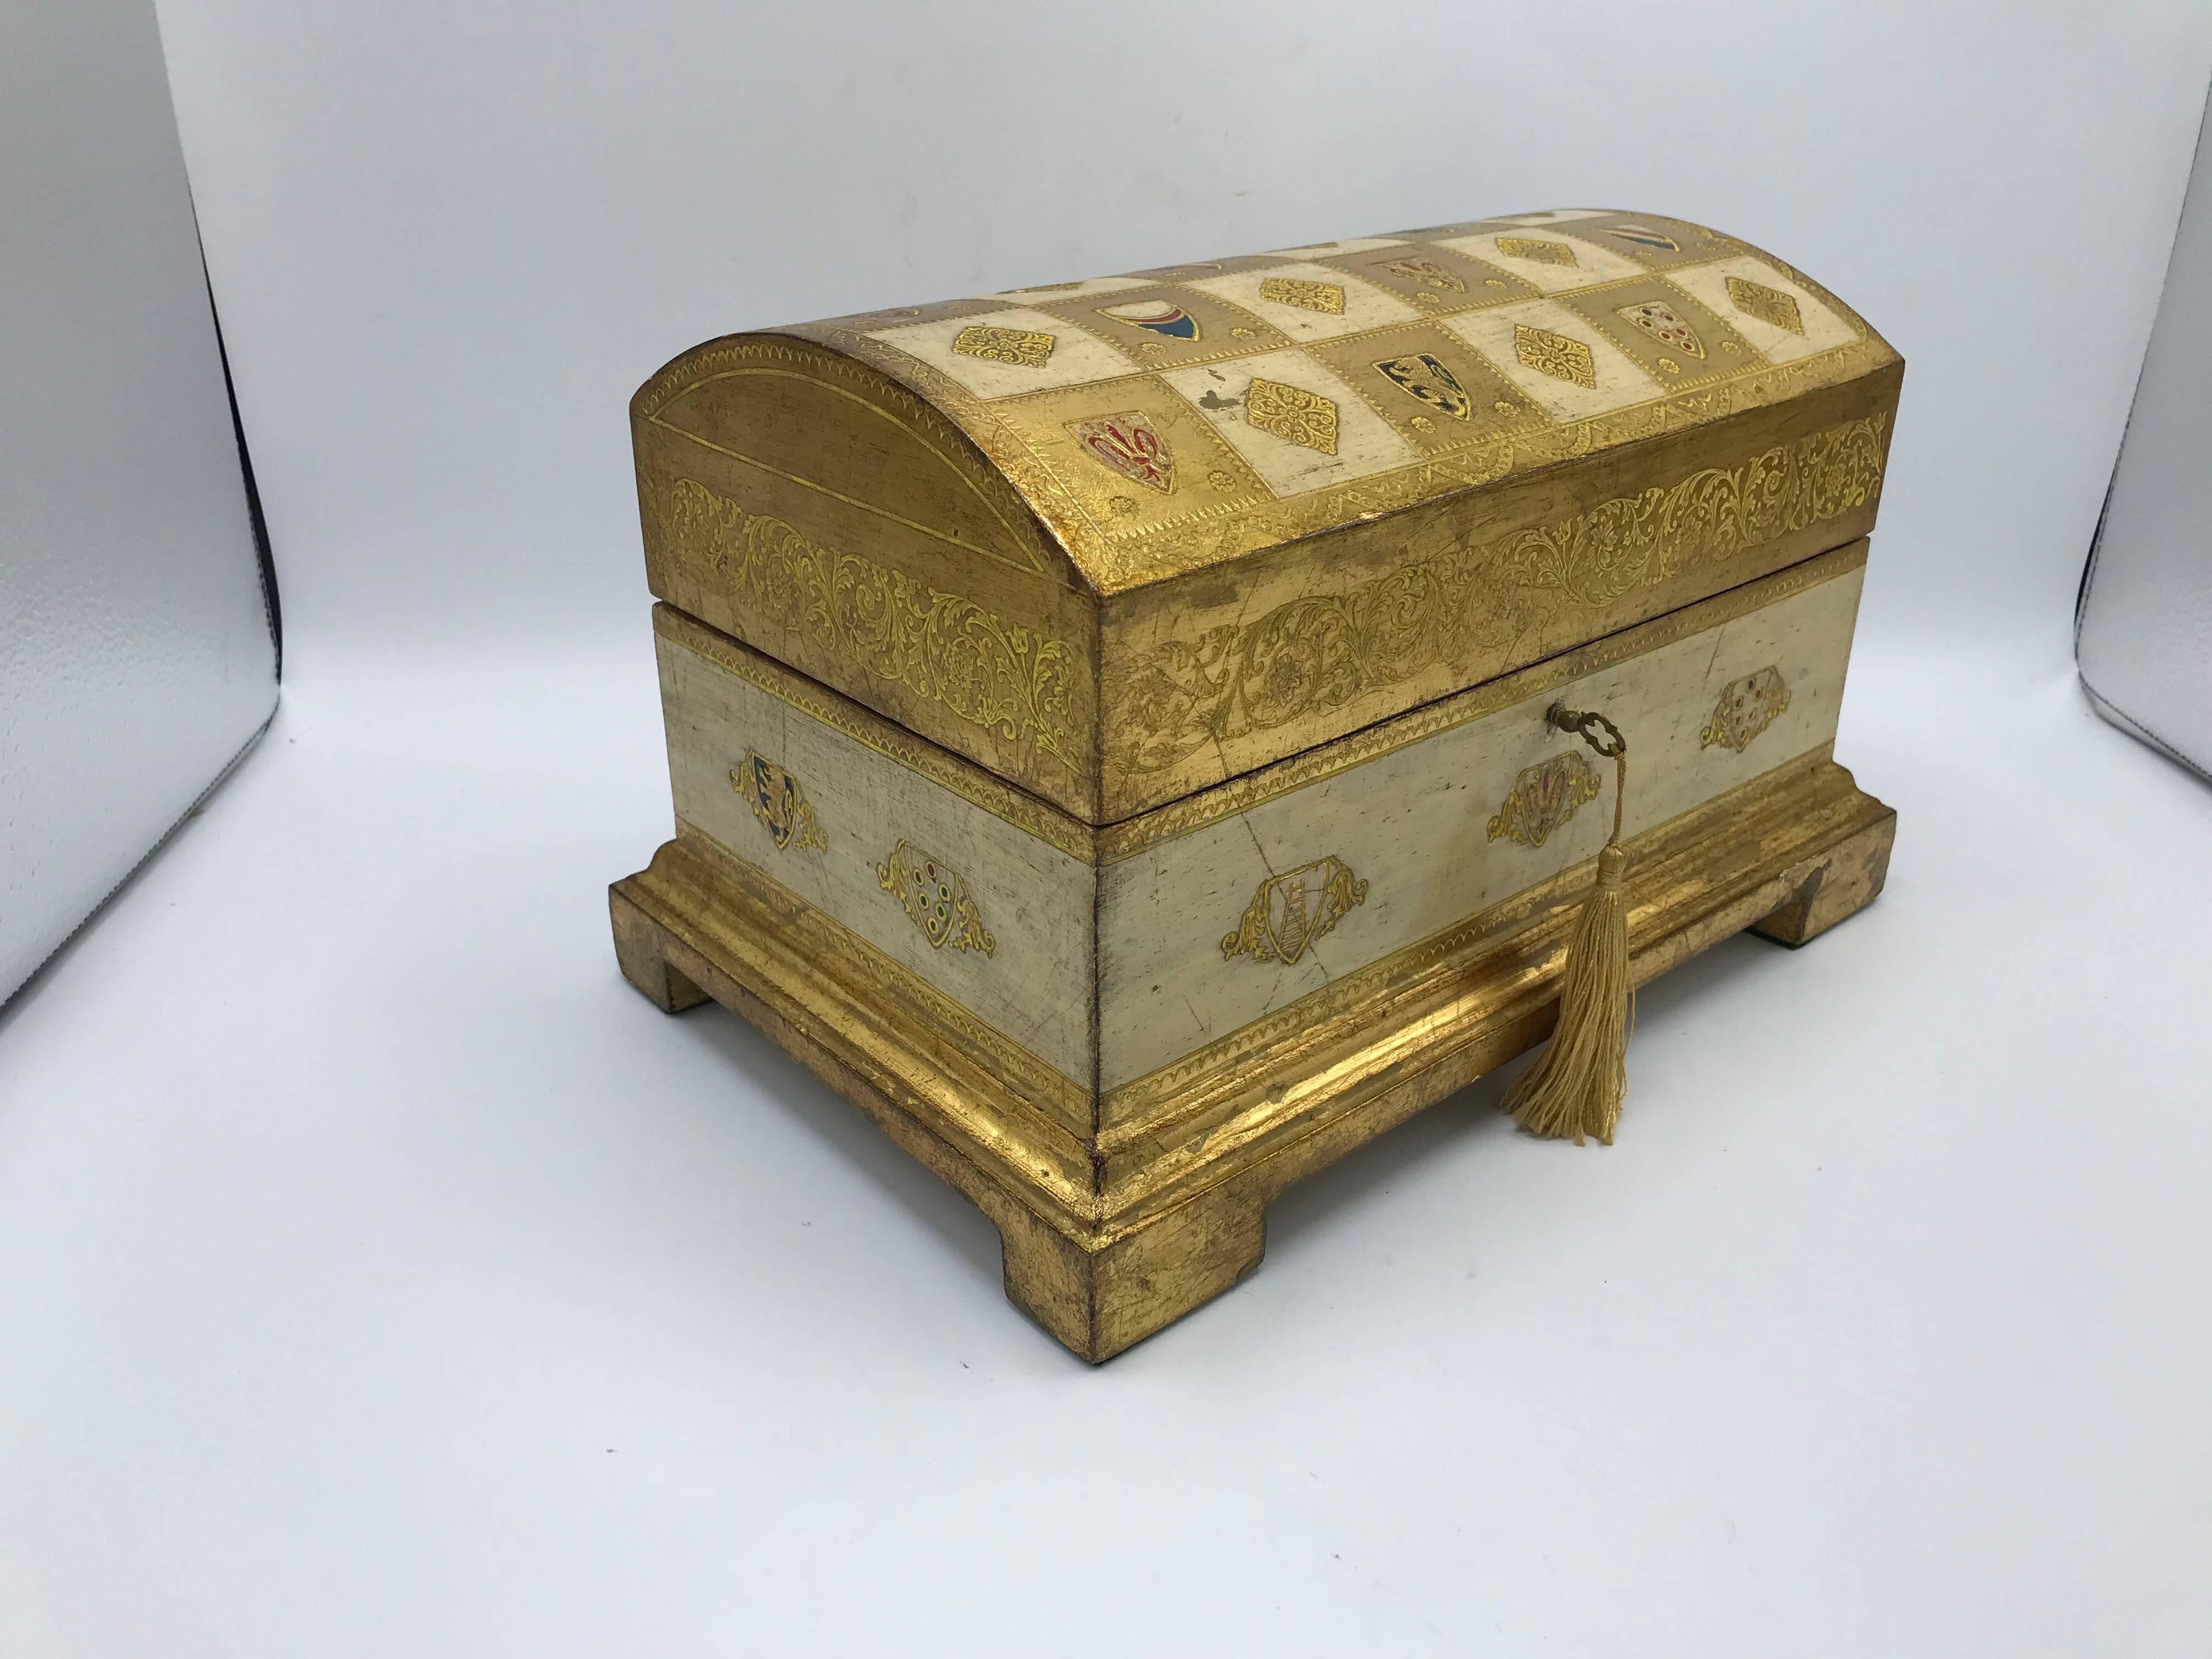 Listed is a gorgeous, 1950s Italian Florentine box/chest with an all-over crest motif. The piece is fully-functional, including its original key.